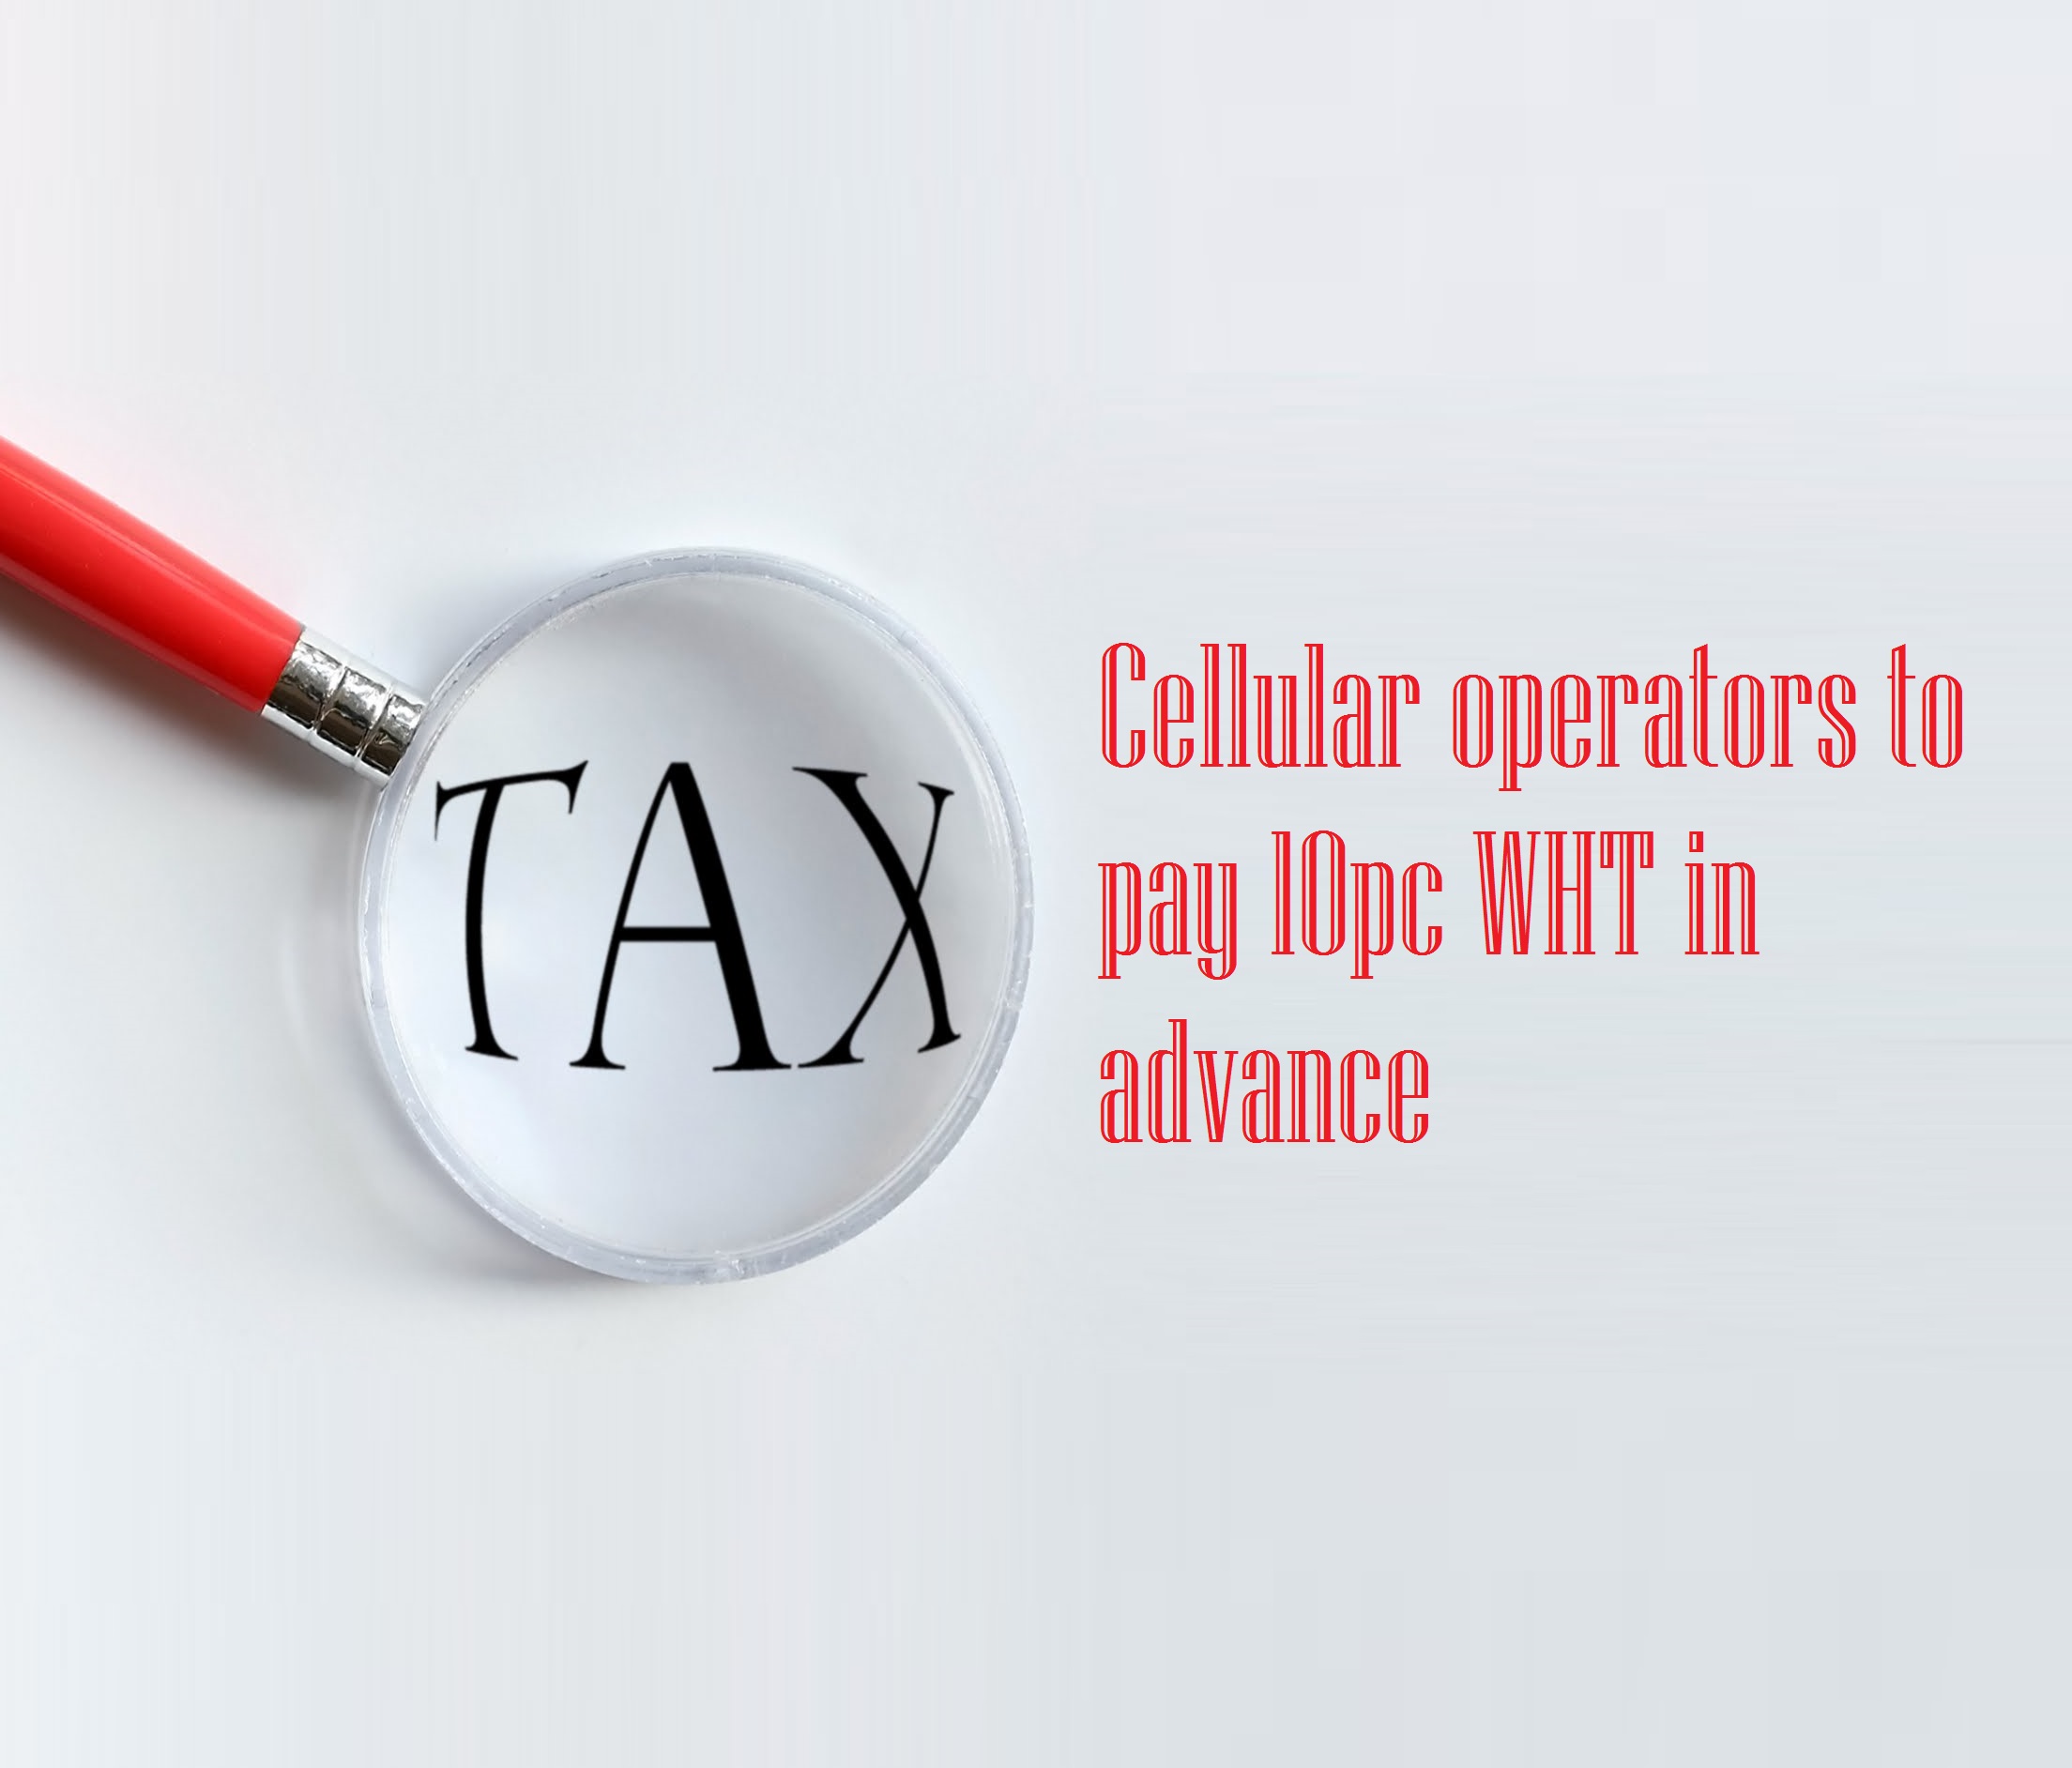 Cellular operators to pay 10pc WHT in advance